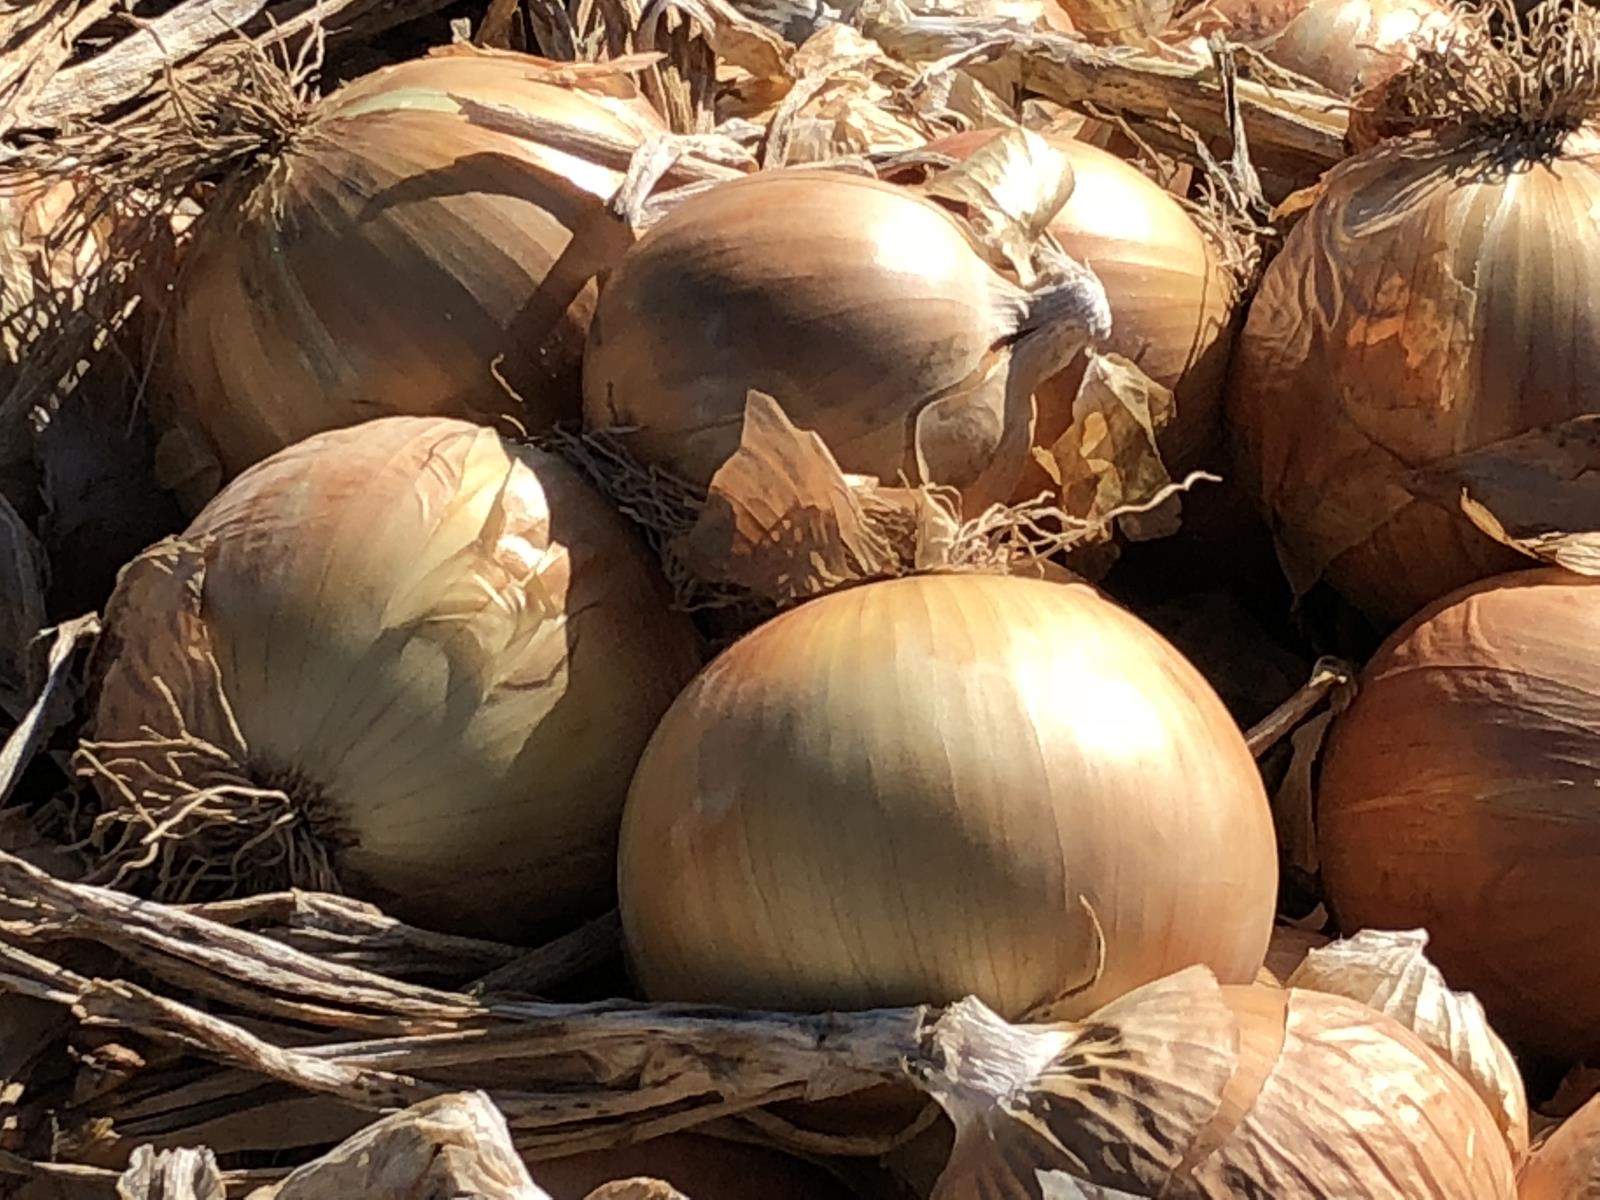 Onions lie in a field near Wilder last September, waiting to be harvested. Reaction to the coronavirus outbreak has significantly decreased demand for the big bulb onions grown in Idaho and Eastern Oregon.